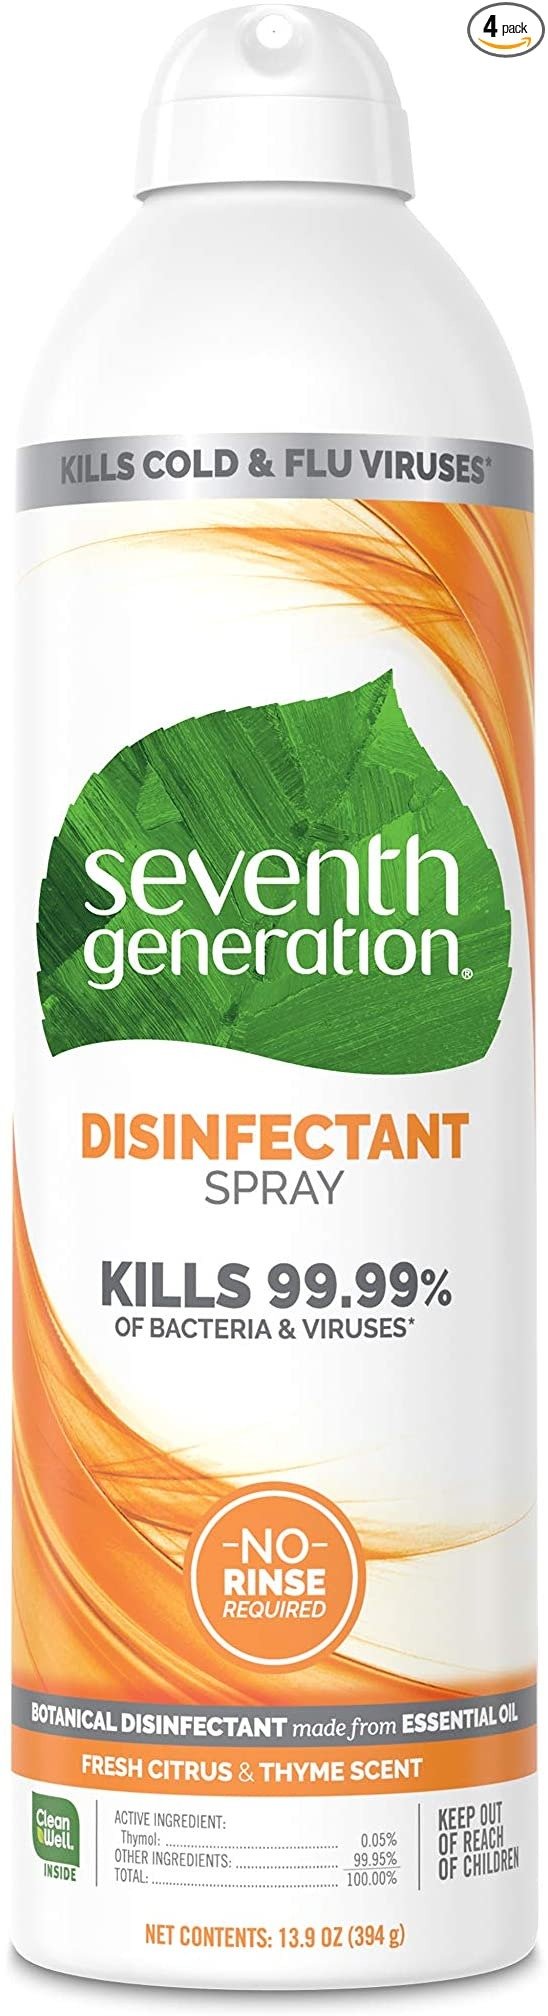 Seventh Generation Disinfectant Spray, Fresh Citrus & Thyme Scent, 13.9 Oz, Pack of 4